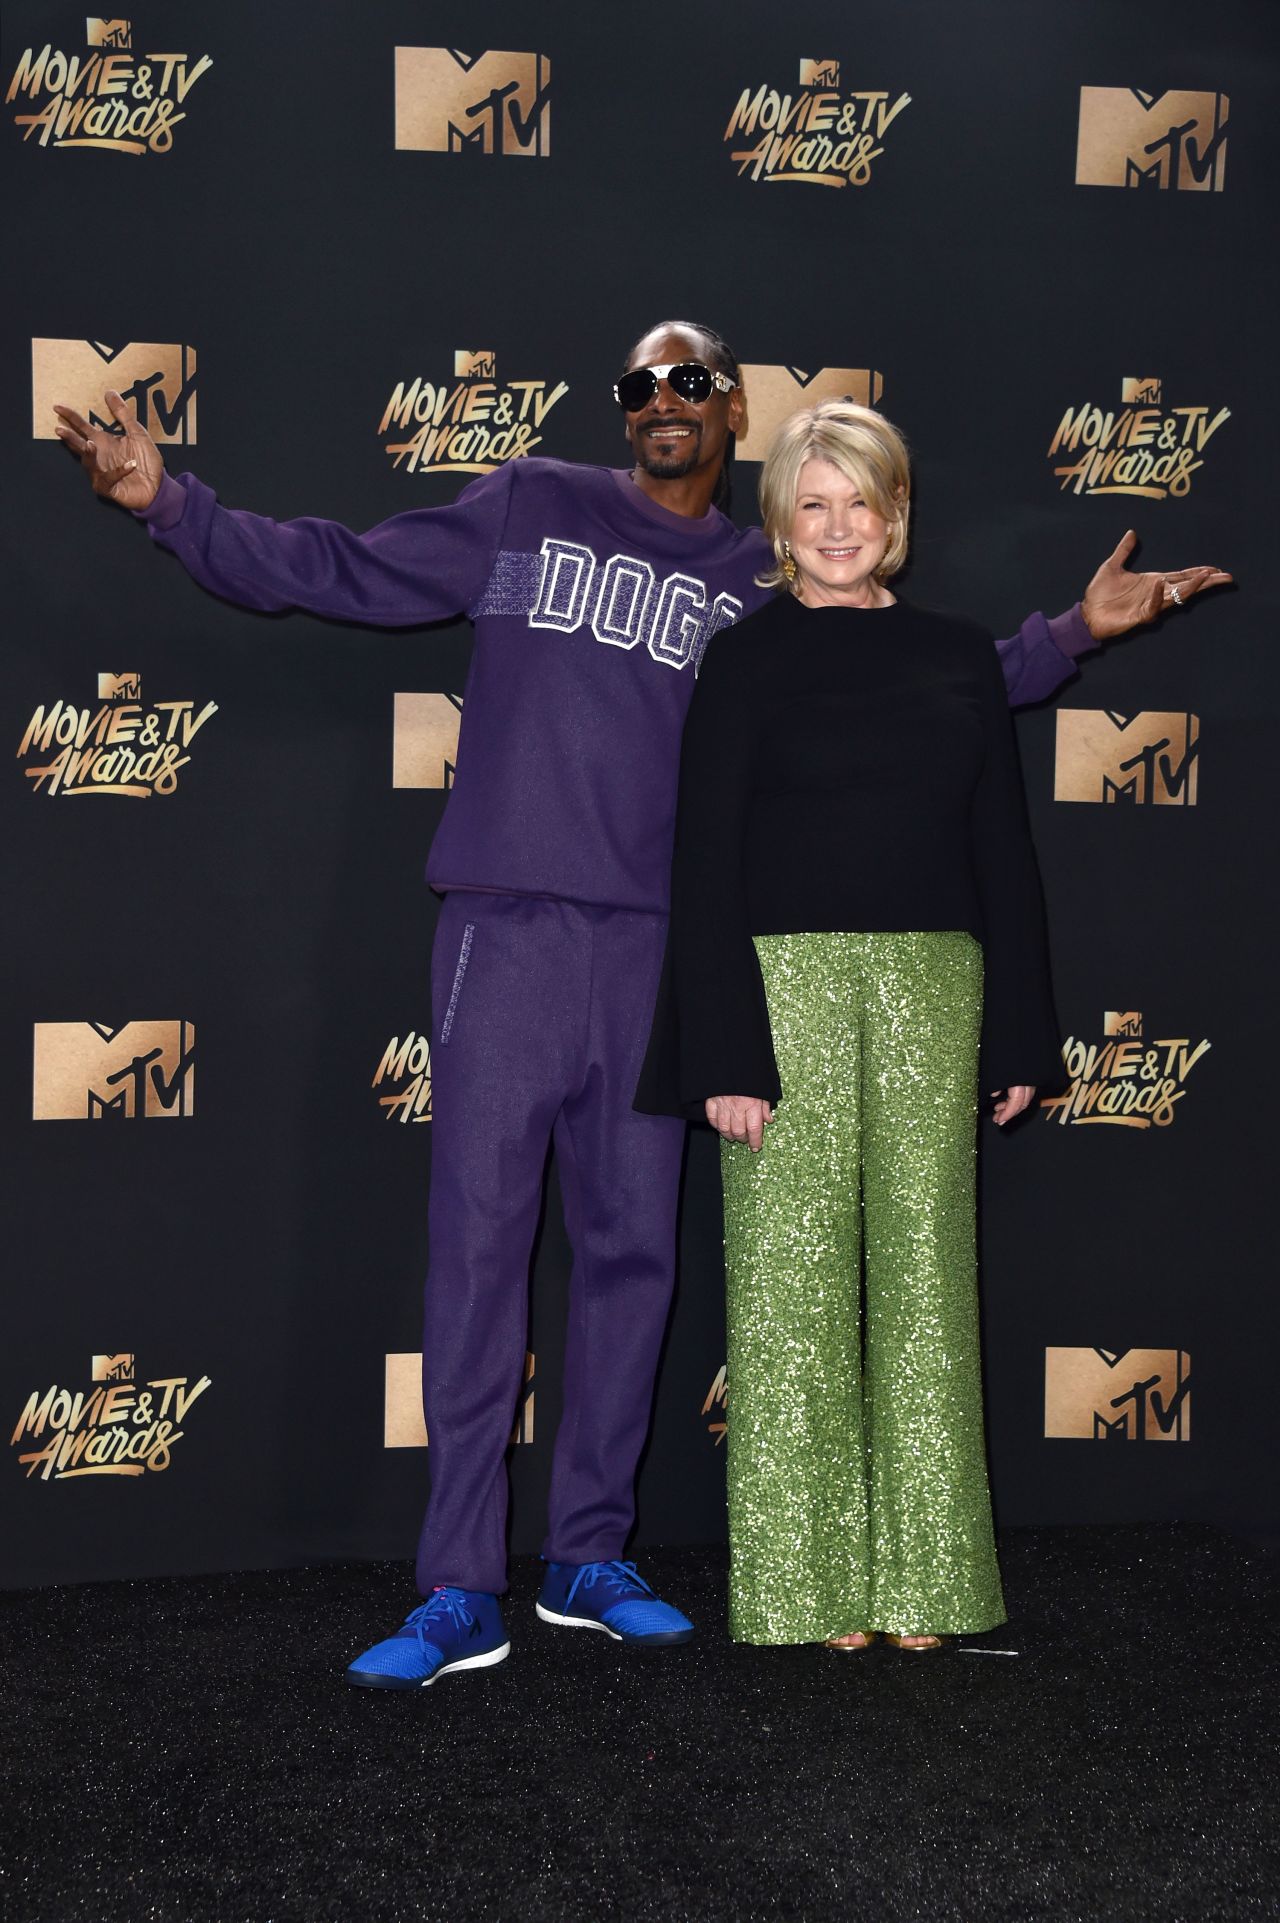 Snoop Dogg and Martha Stewart co-hosted a VH1 show from 2016 to 2018.